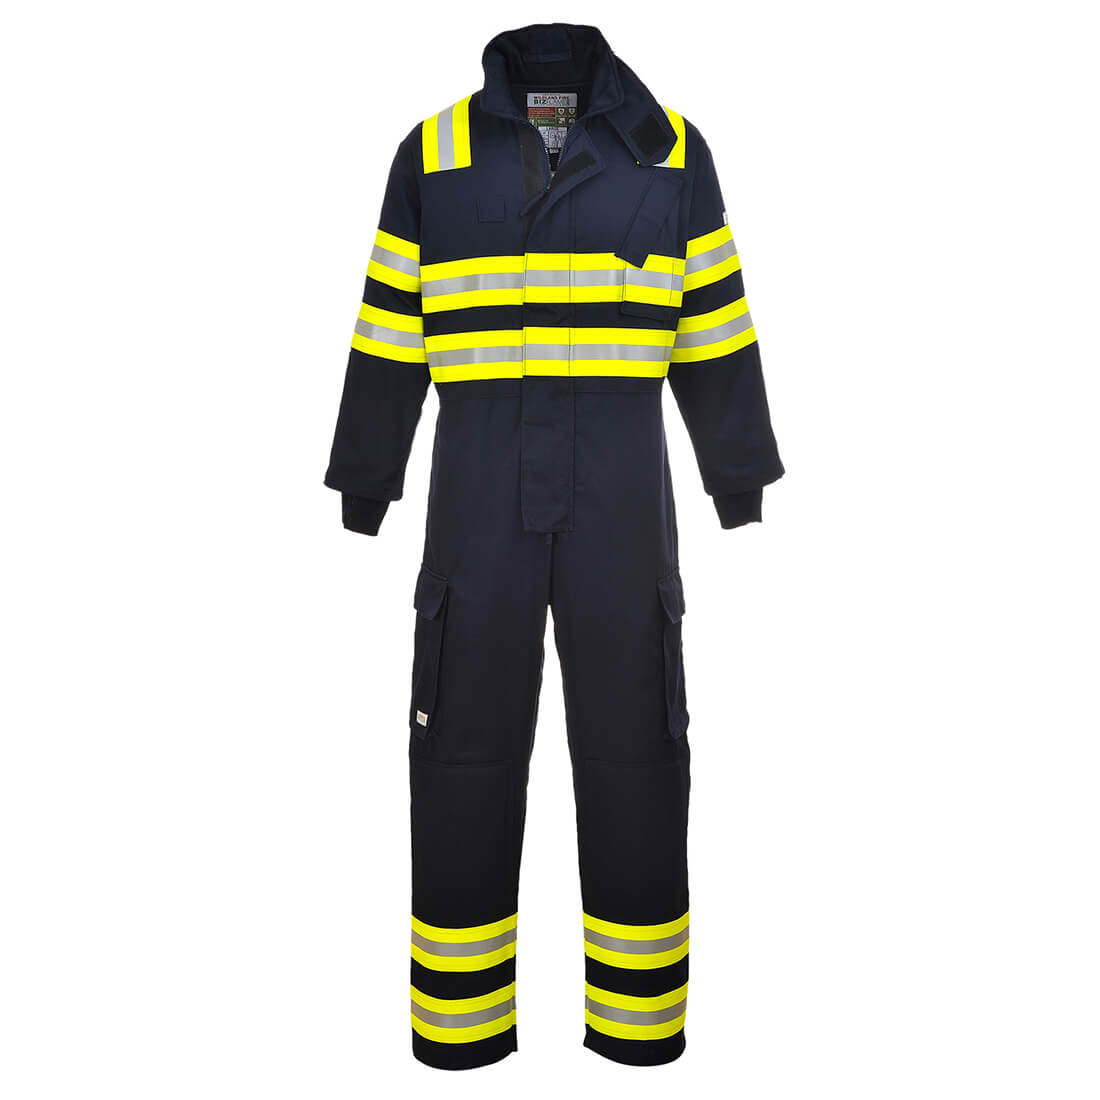 BizFlame Wildland Fire Coverall Navy S